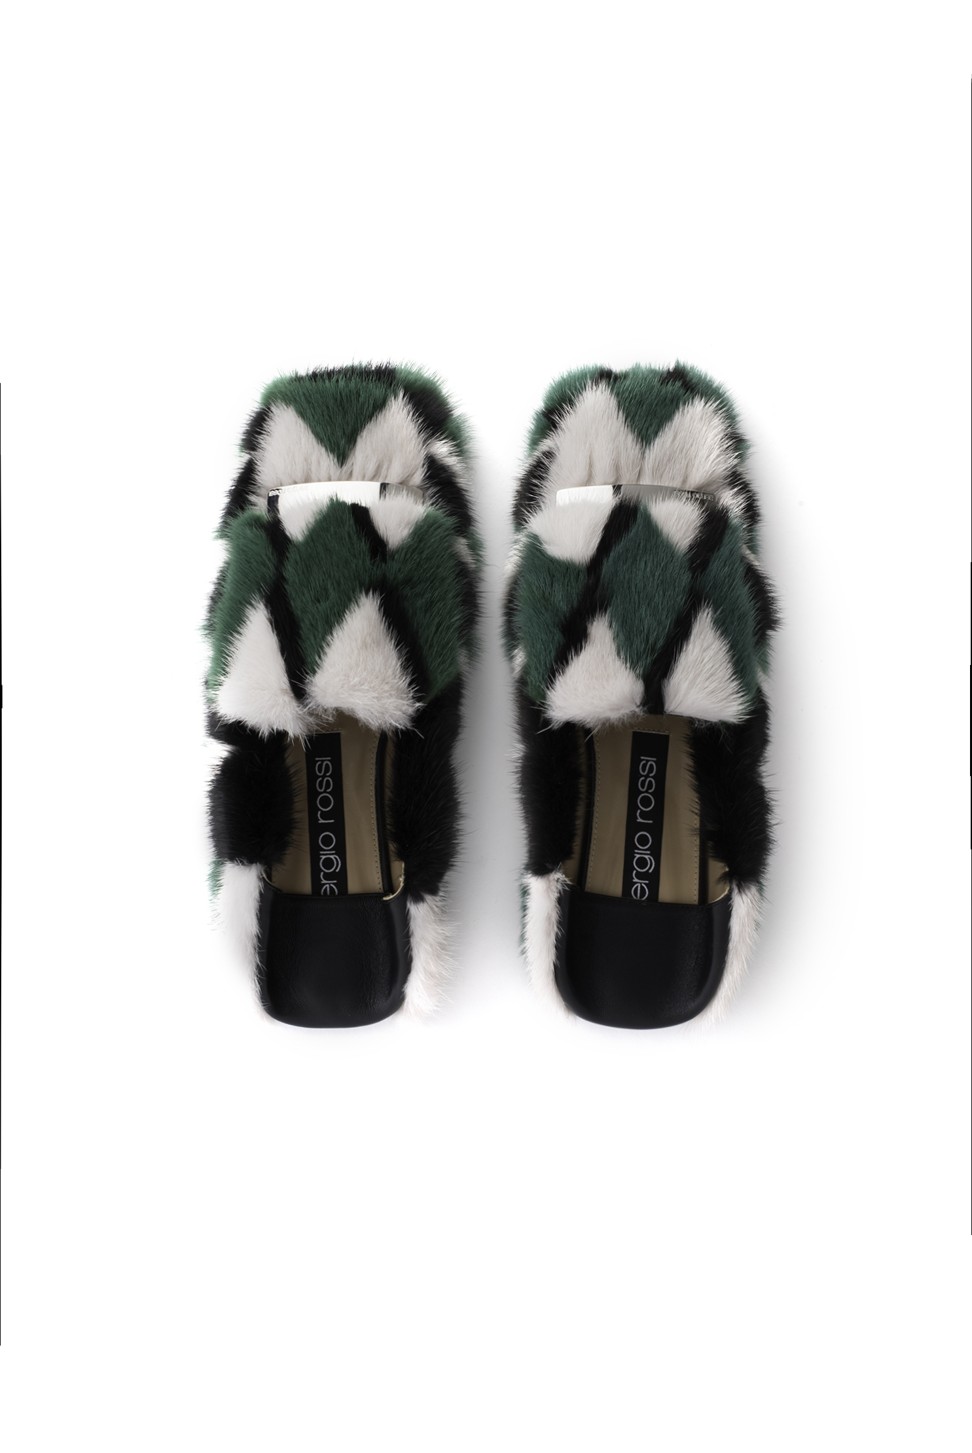 Inspired by geometric architectural patterns, these furry moccasins with green geometric prints enhance your femininity.